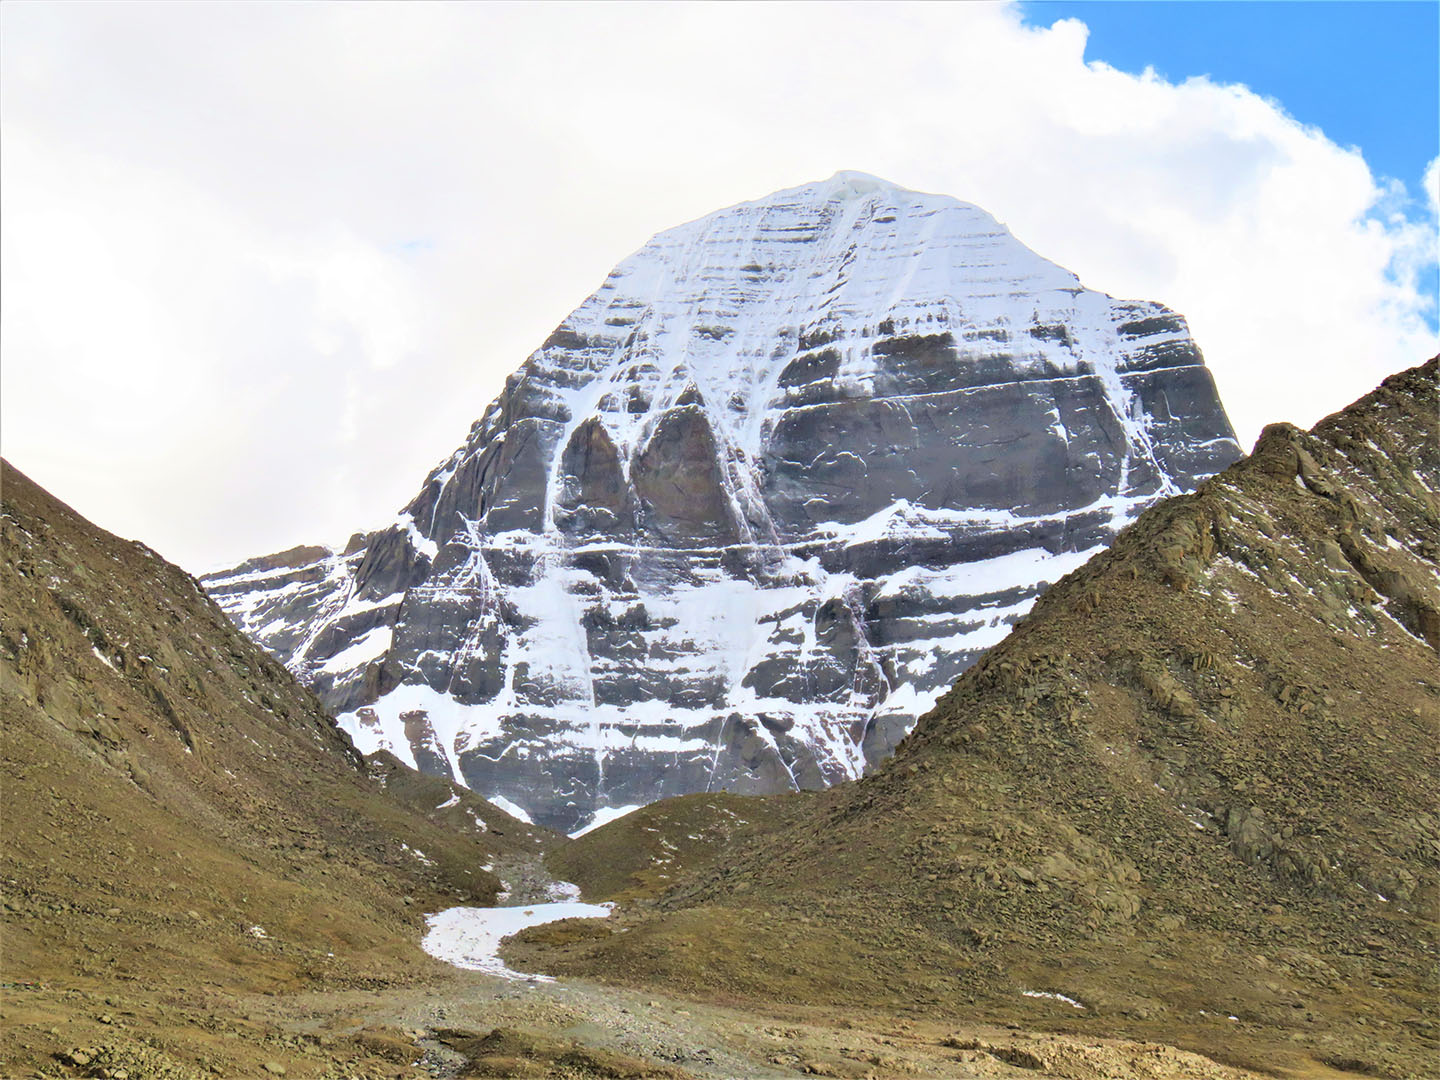 Mount Kailash north face 